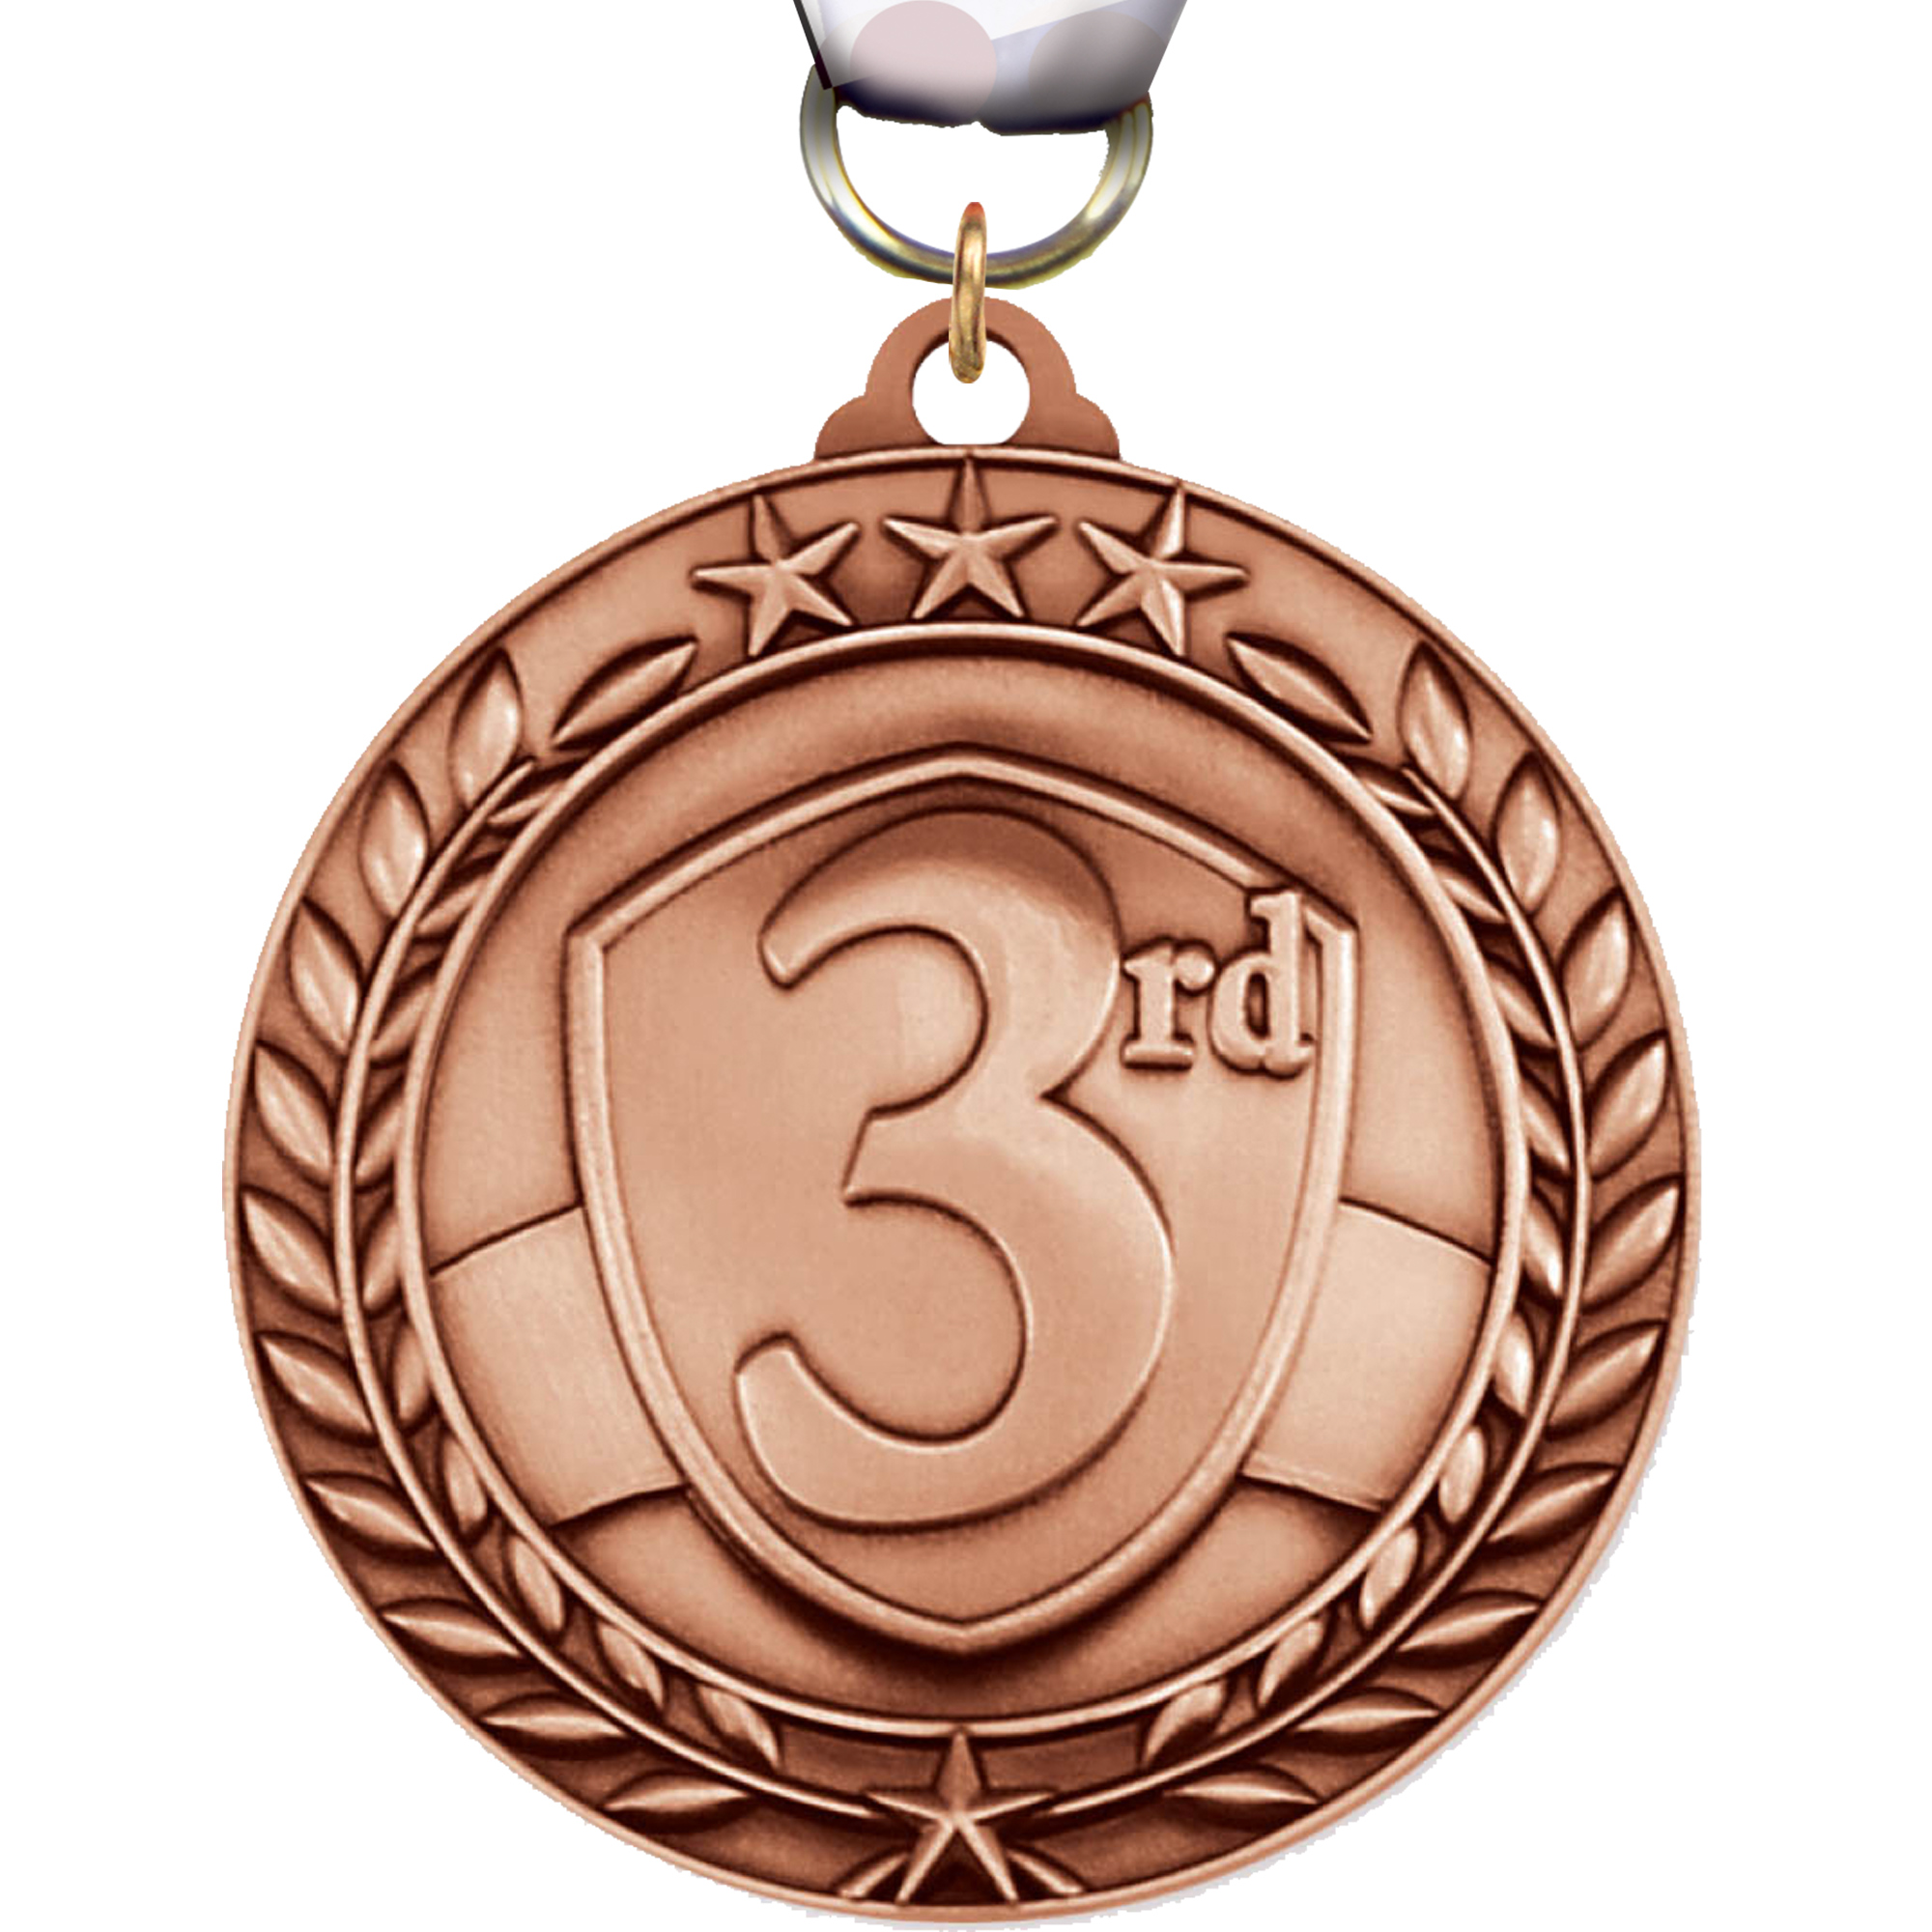 3rd 1.75 inch Dimensional Medal